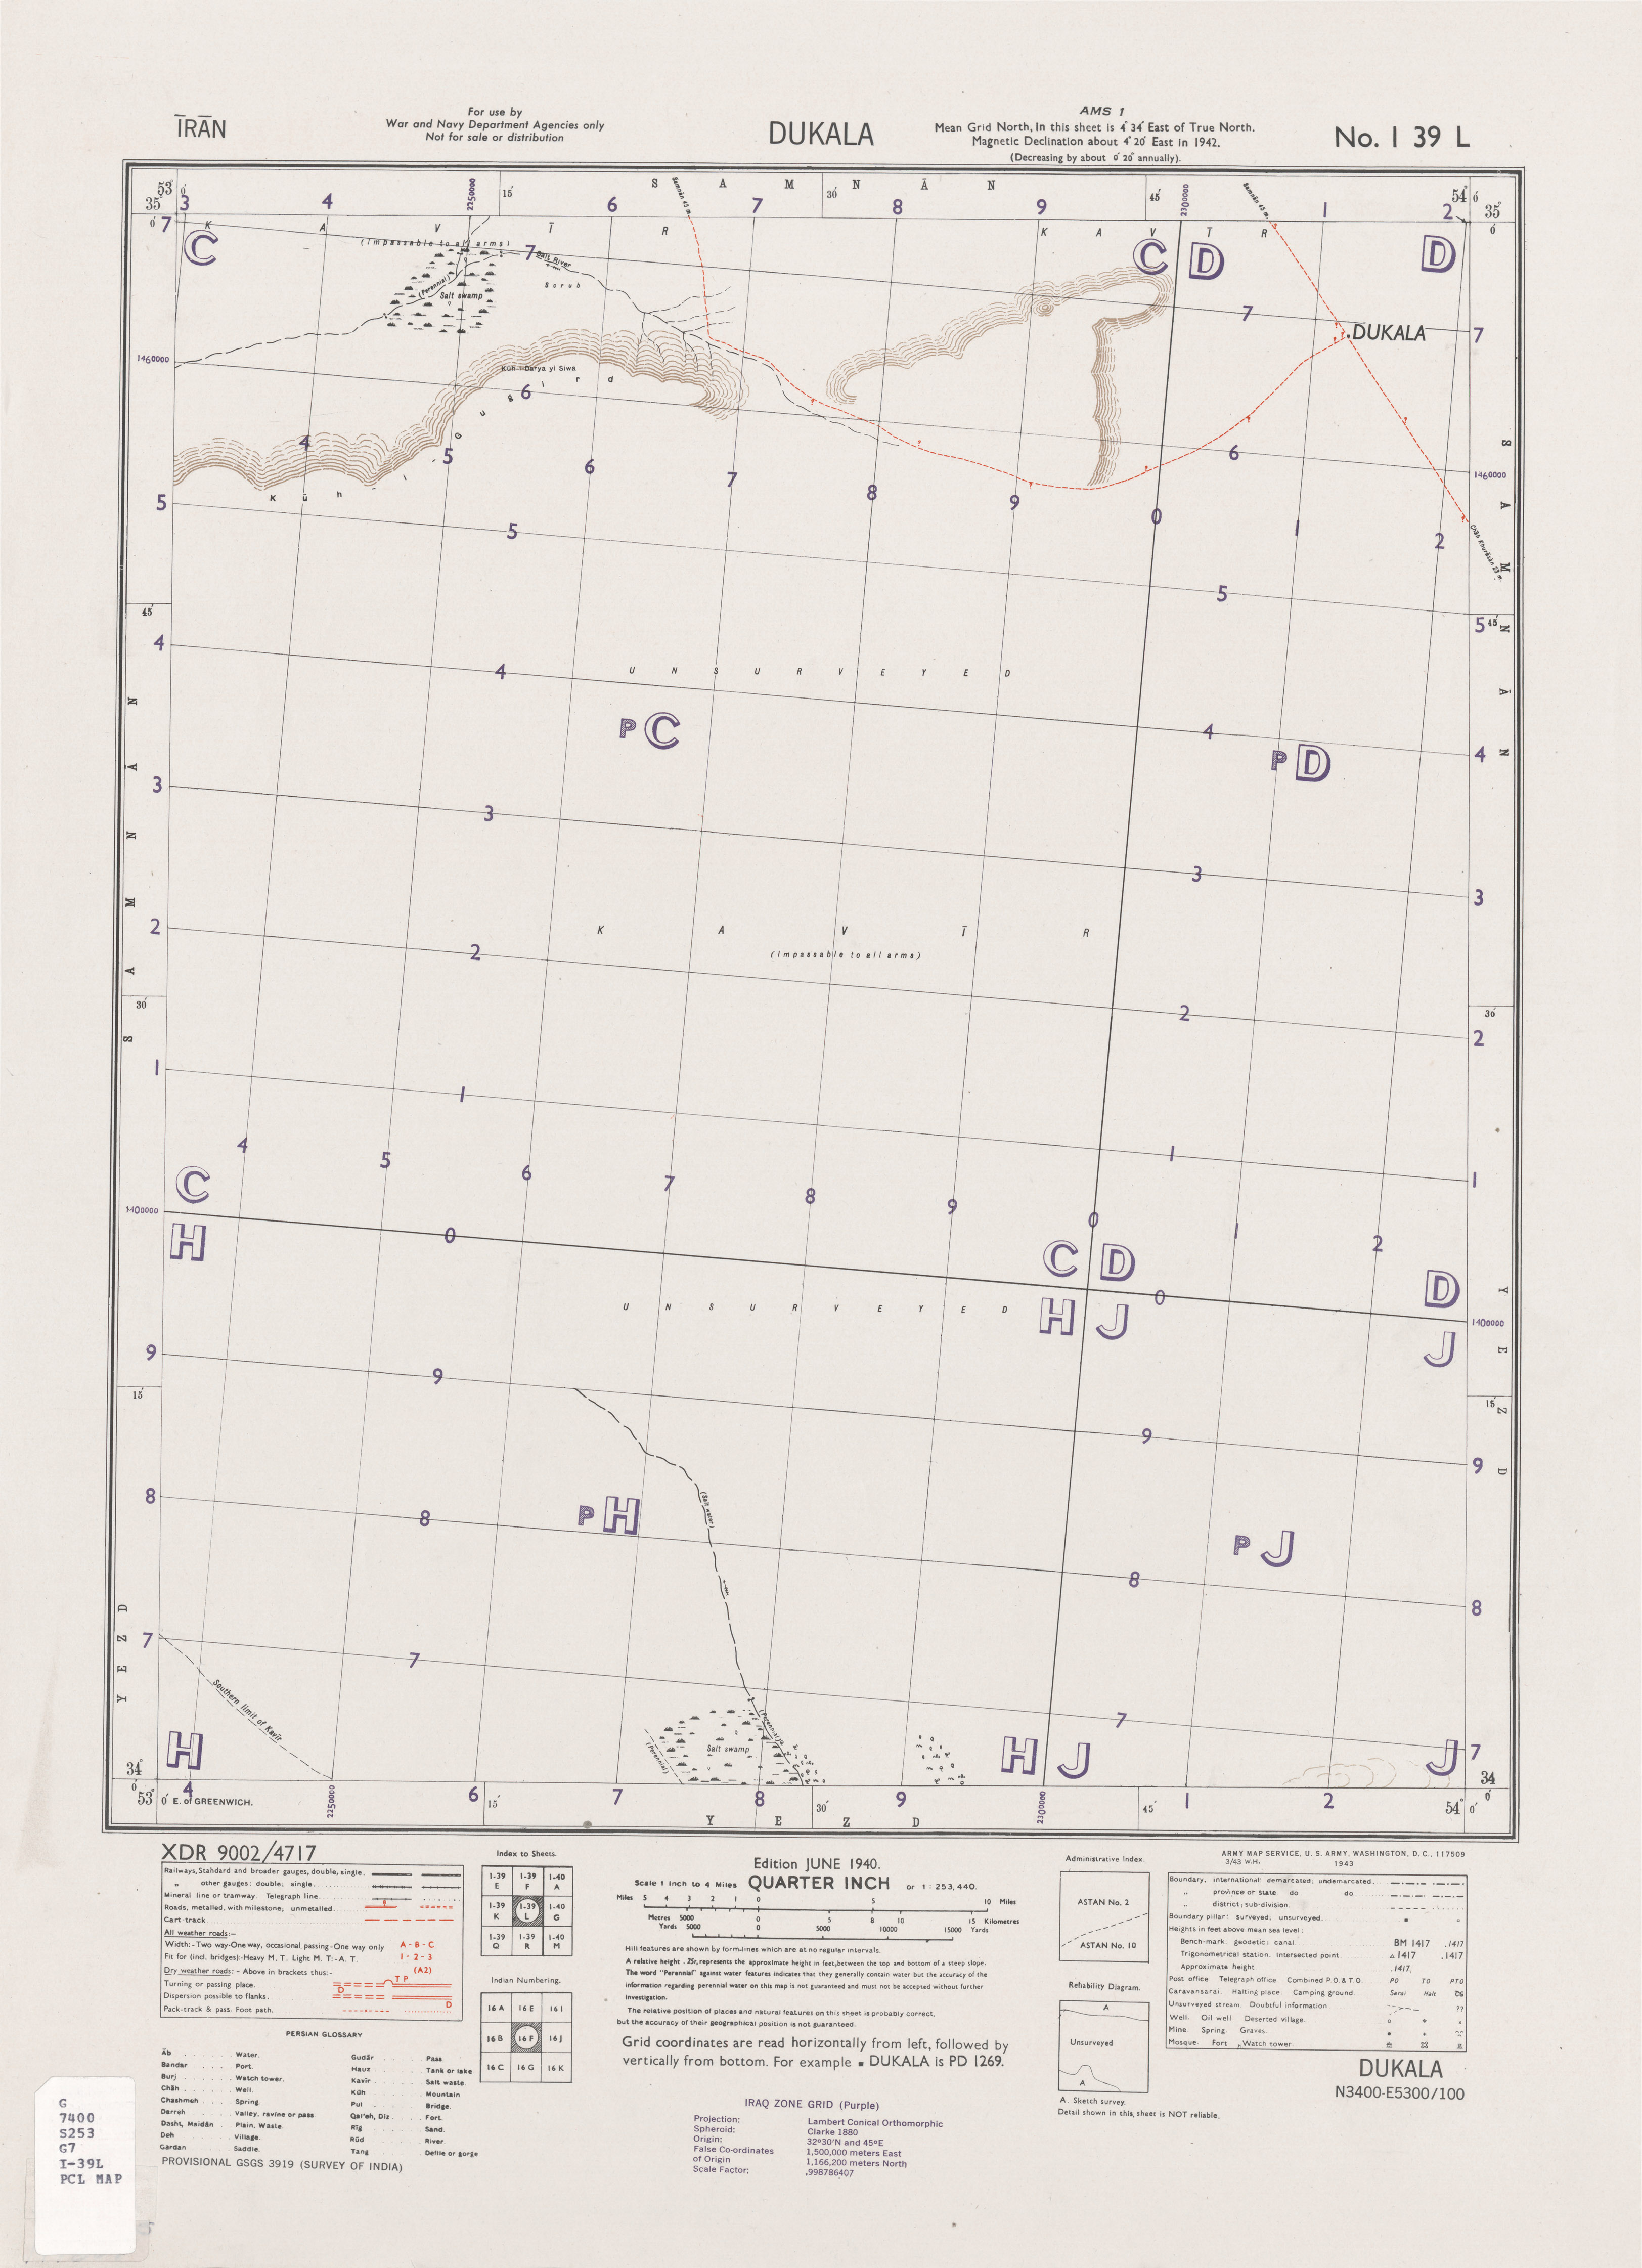 Iraq & Iran AMS Topographic Maps - Perry-Castañeda Map Collection - UT ...